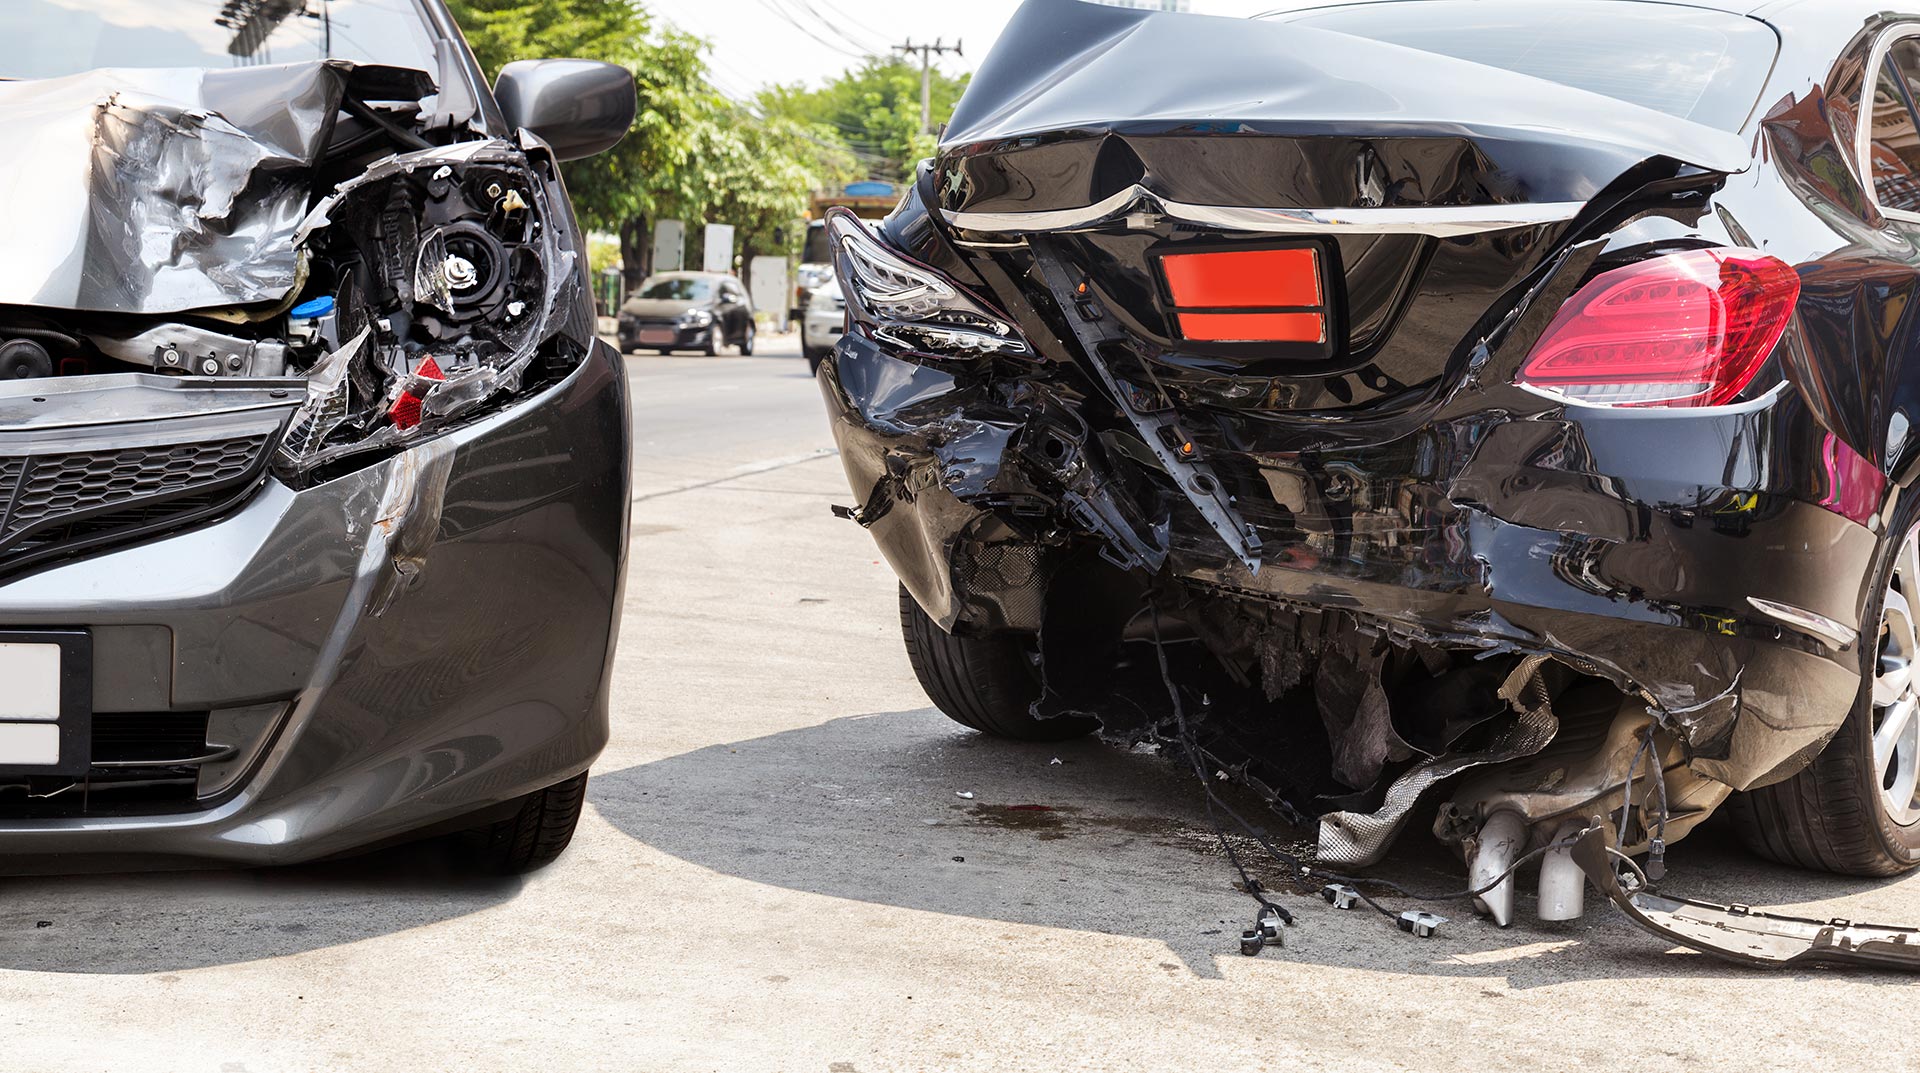 Where Do Car Accidents Happen Most?